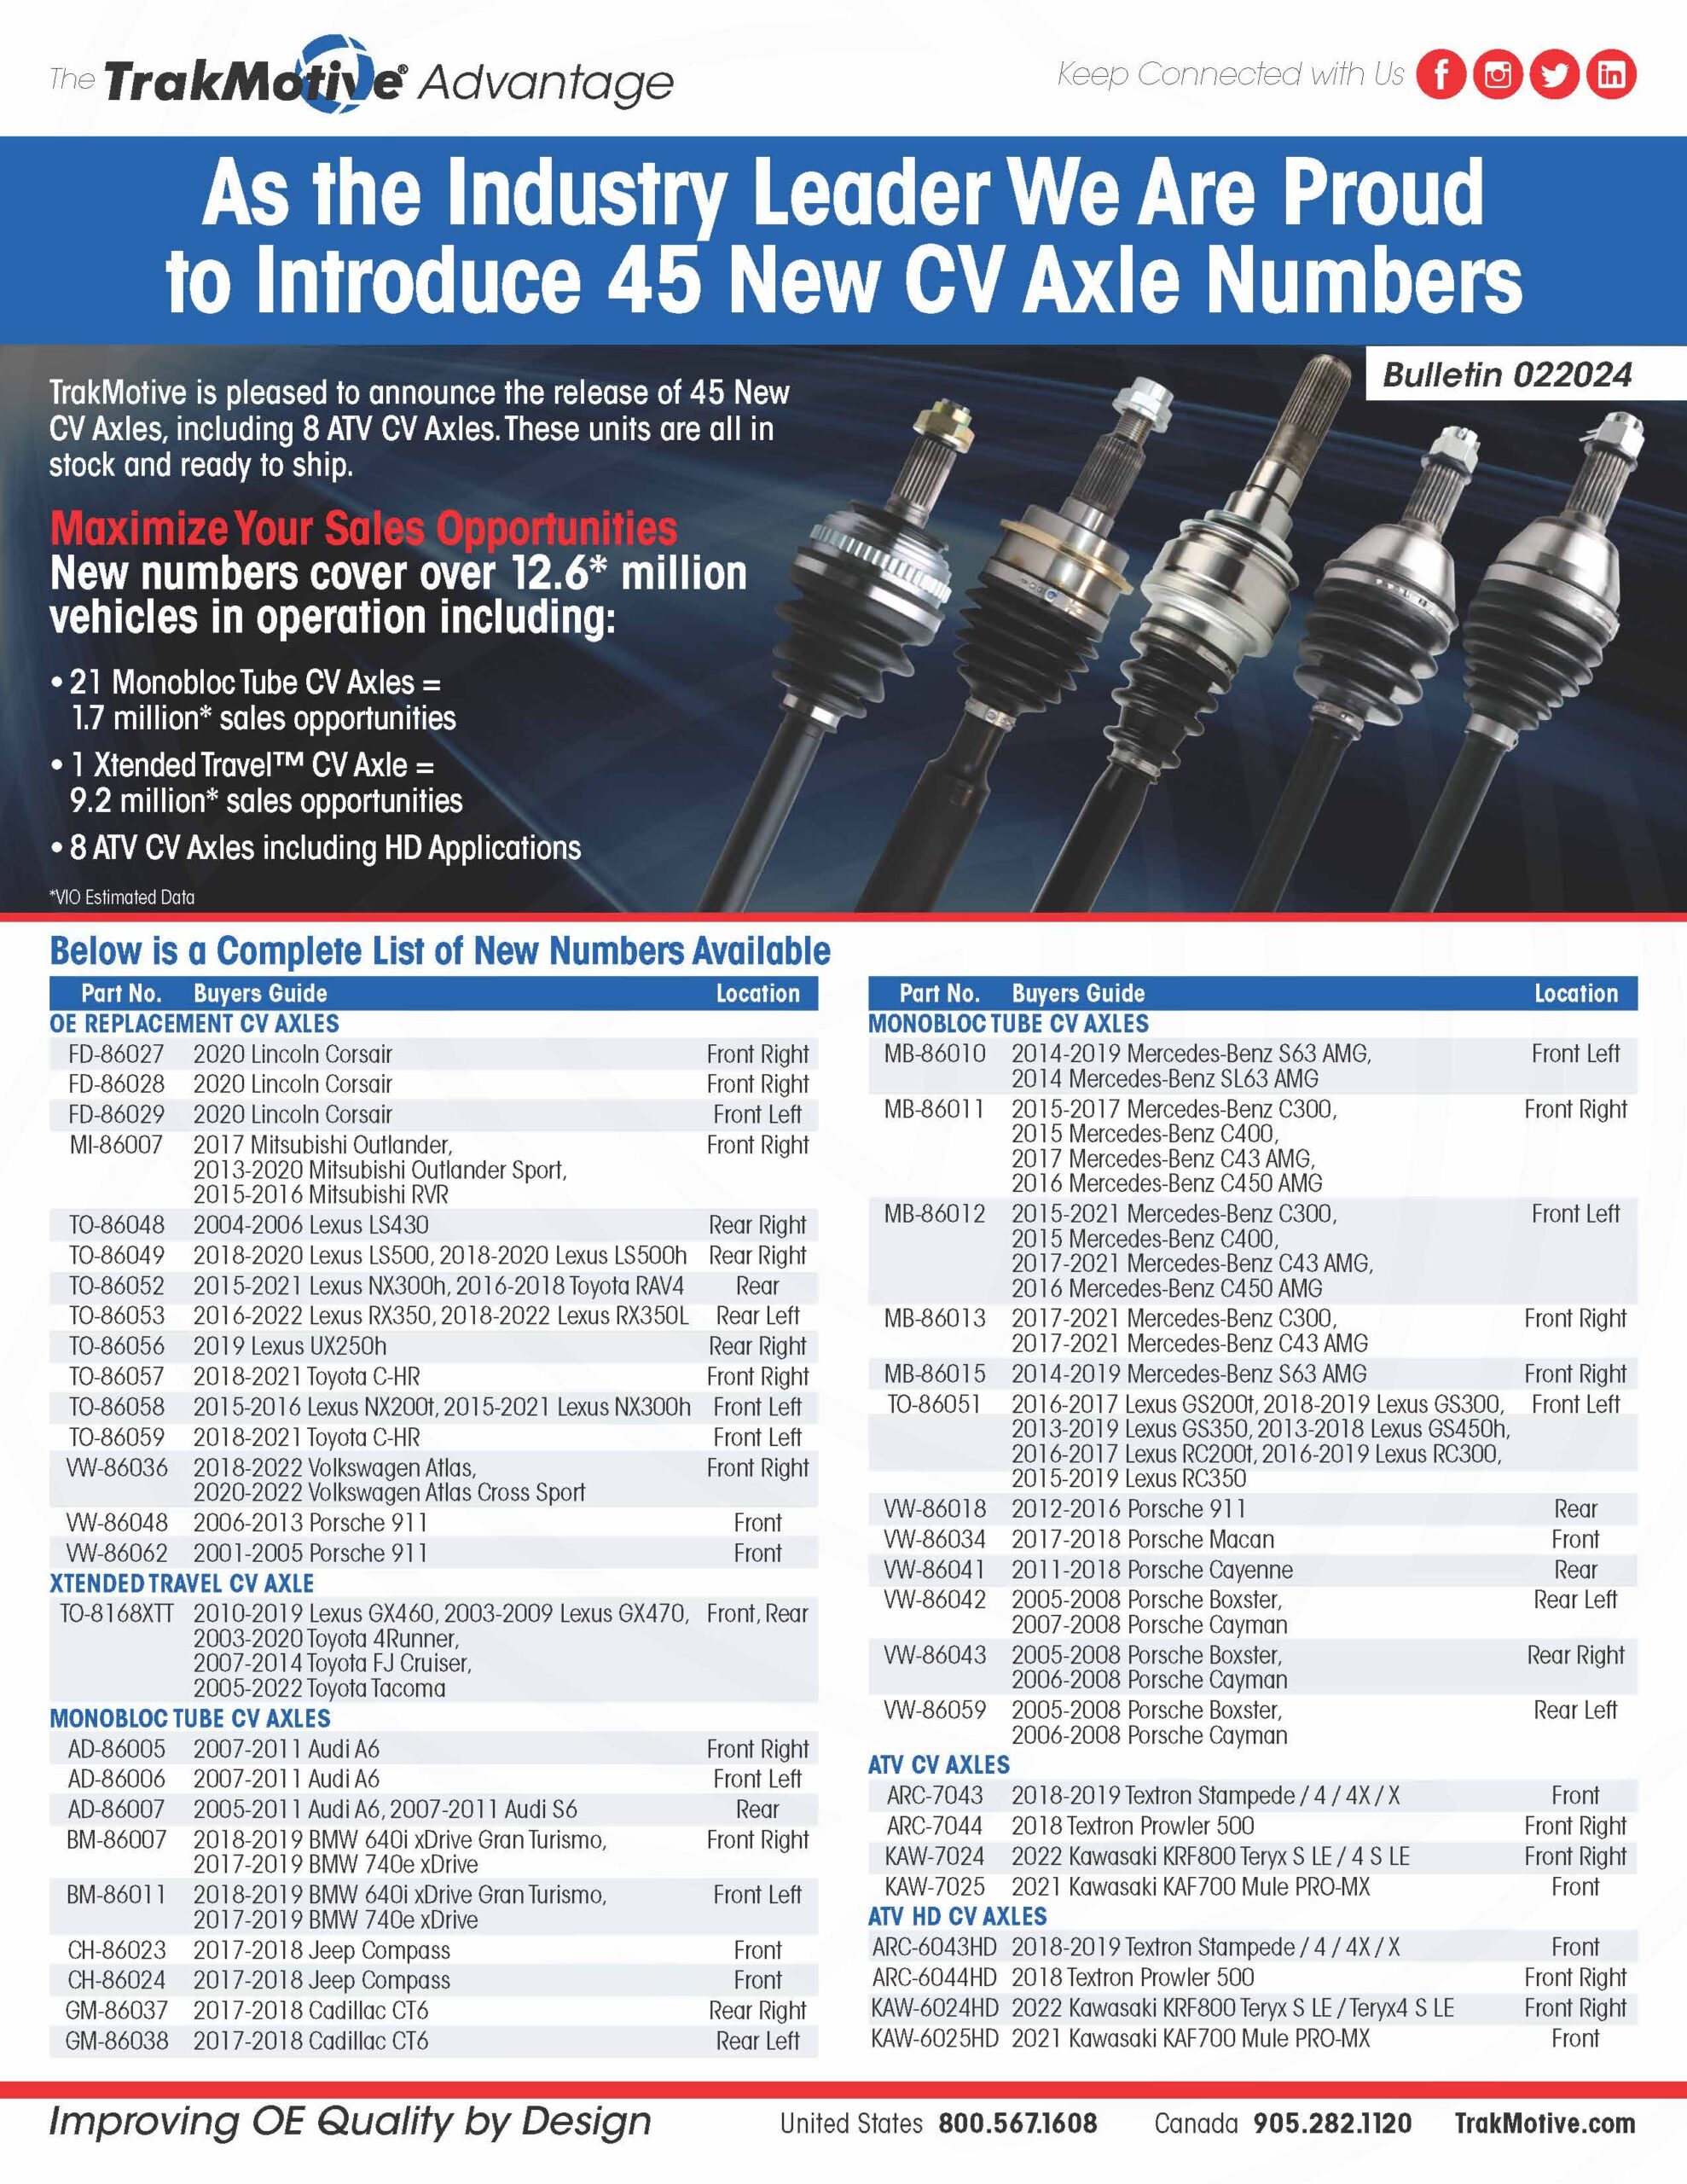 02/2023: TrakMotive Adds 45 New CV Axle Numbers